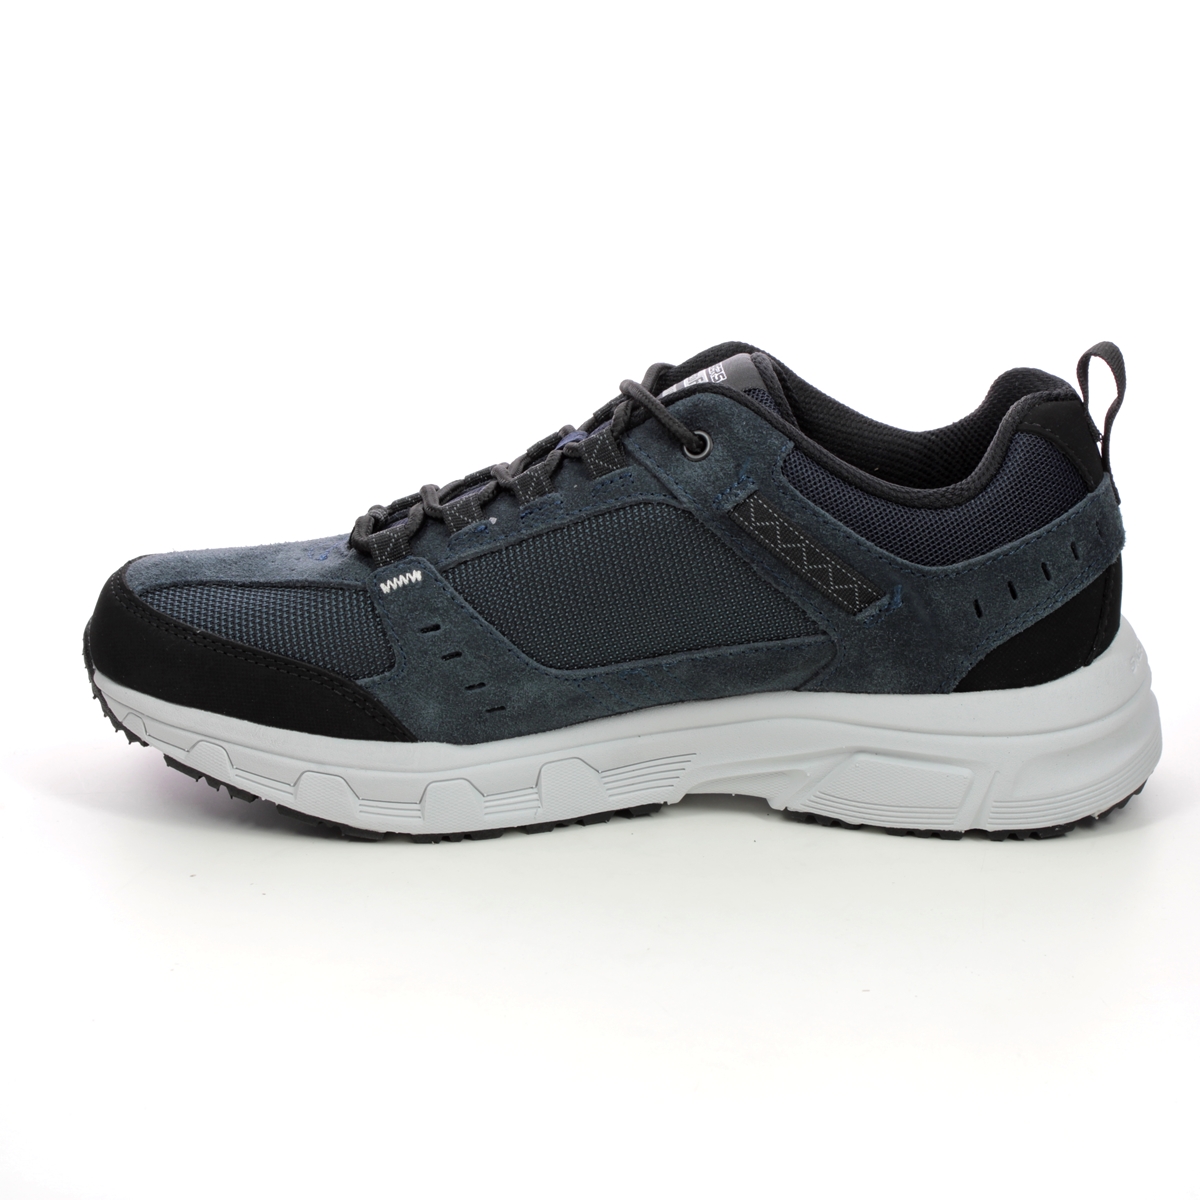 Skechers Oak Canyon Relaxed Fit 51893 NVBK Navy trainers